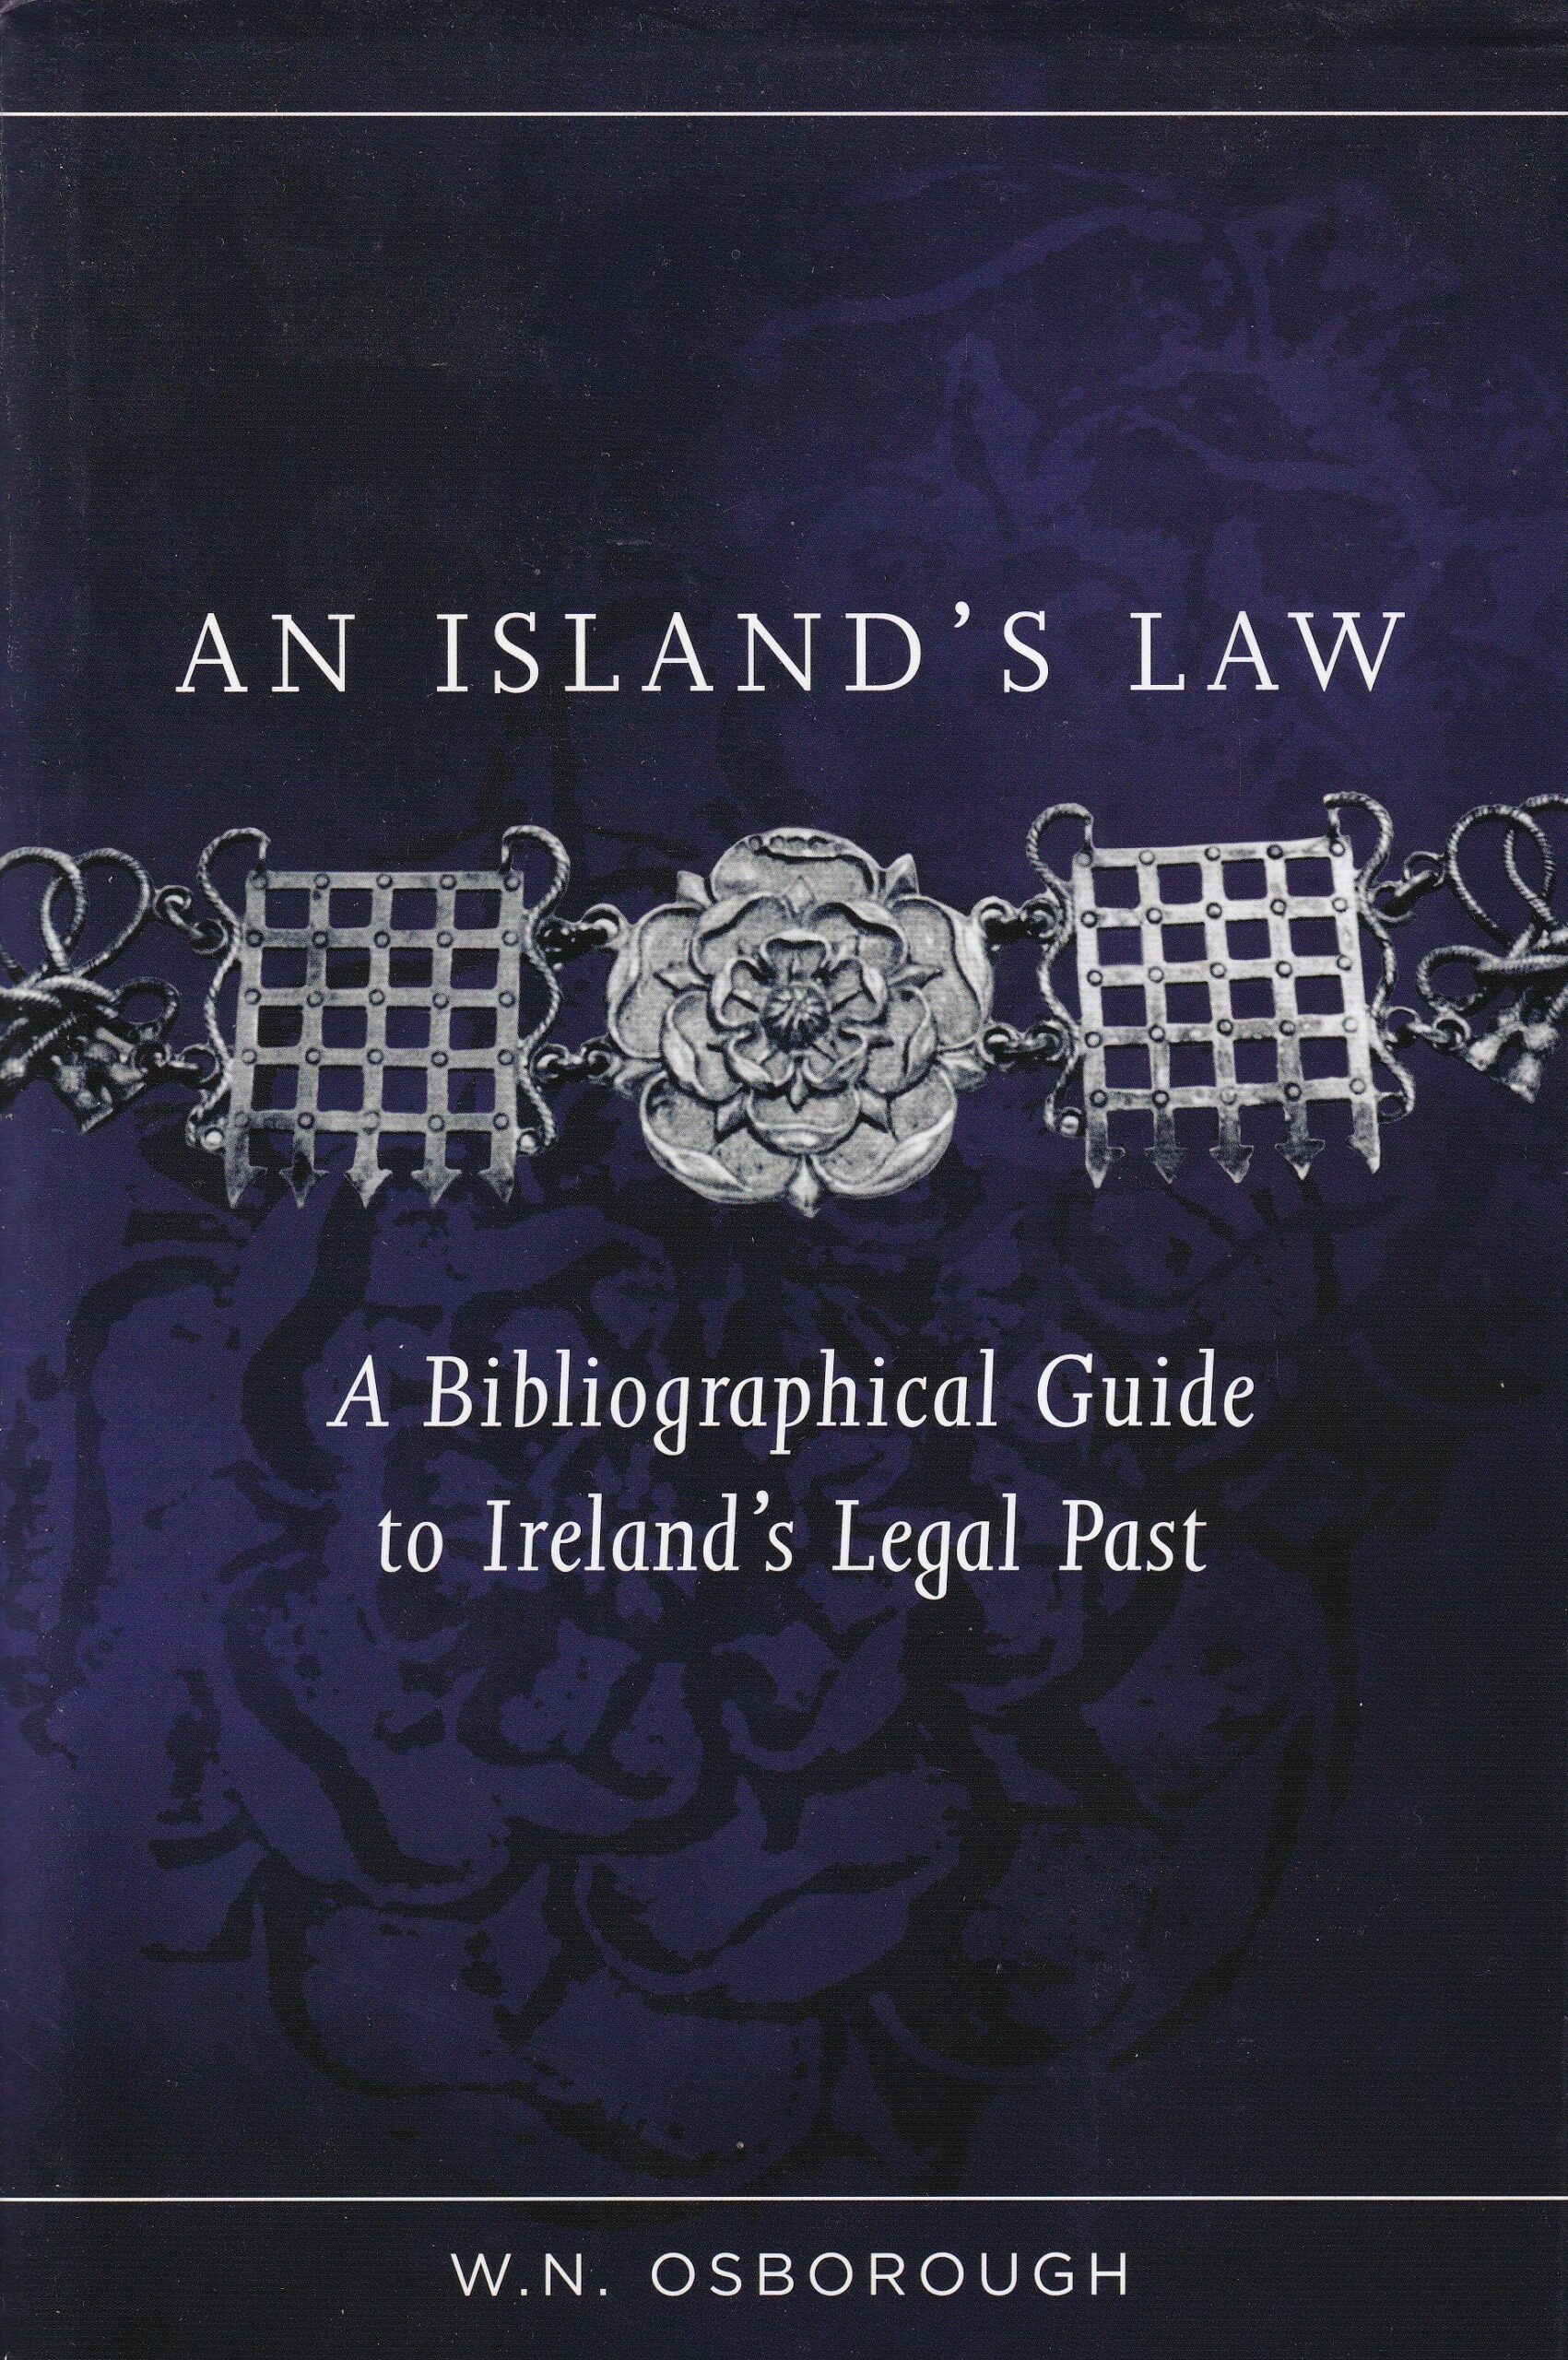 An Island’s Law: A Bibliographical Guide to Ireland’s Legal Past | W.N. Osborough | Charlie Byrne's